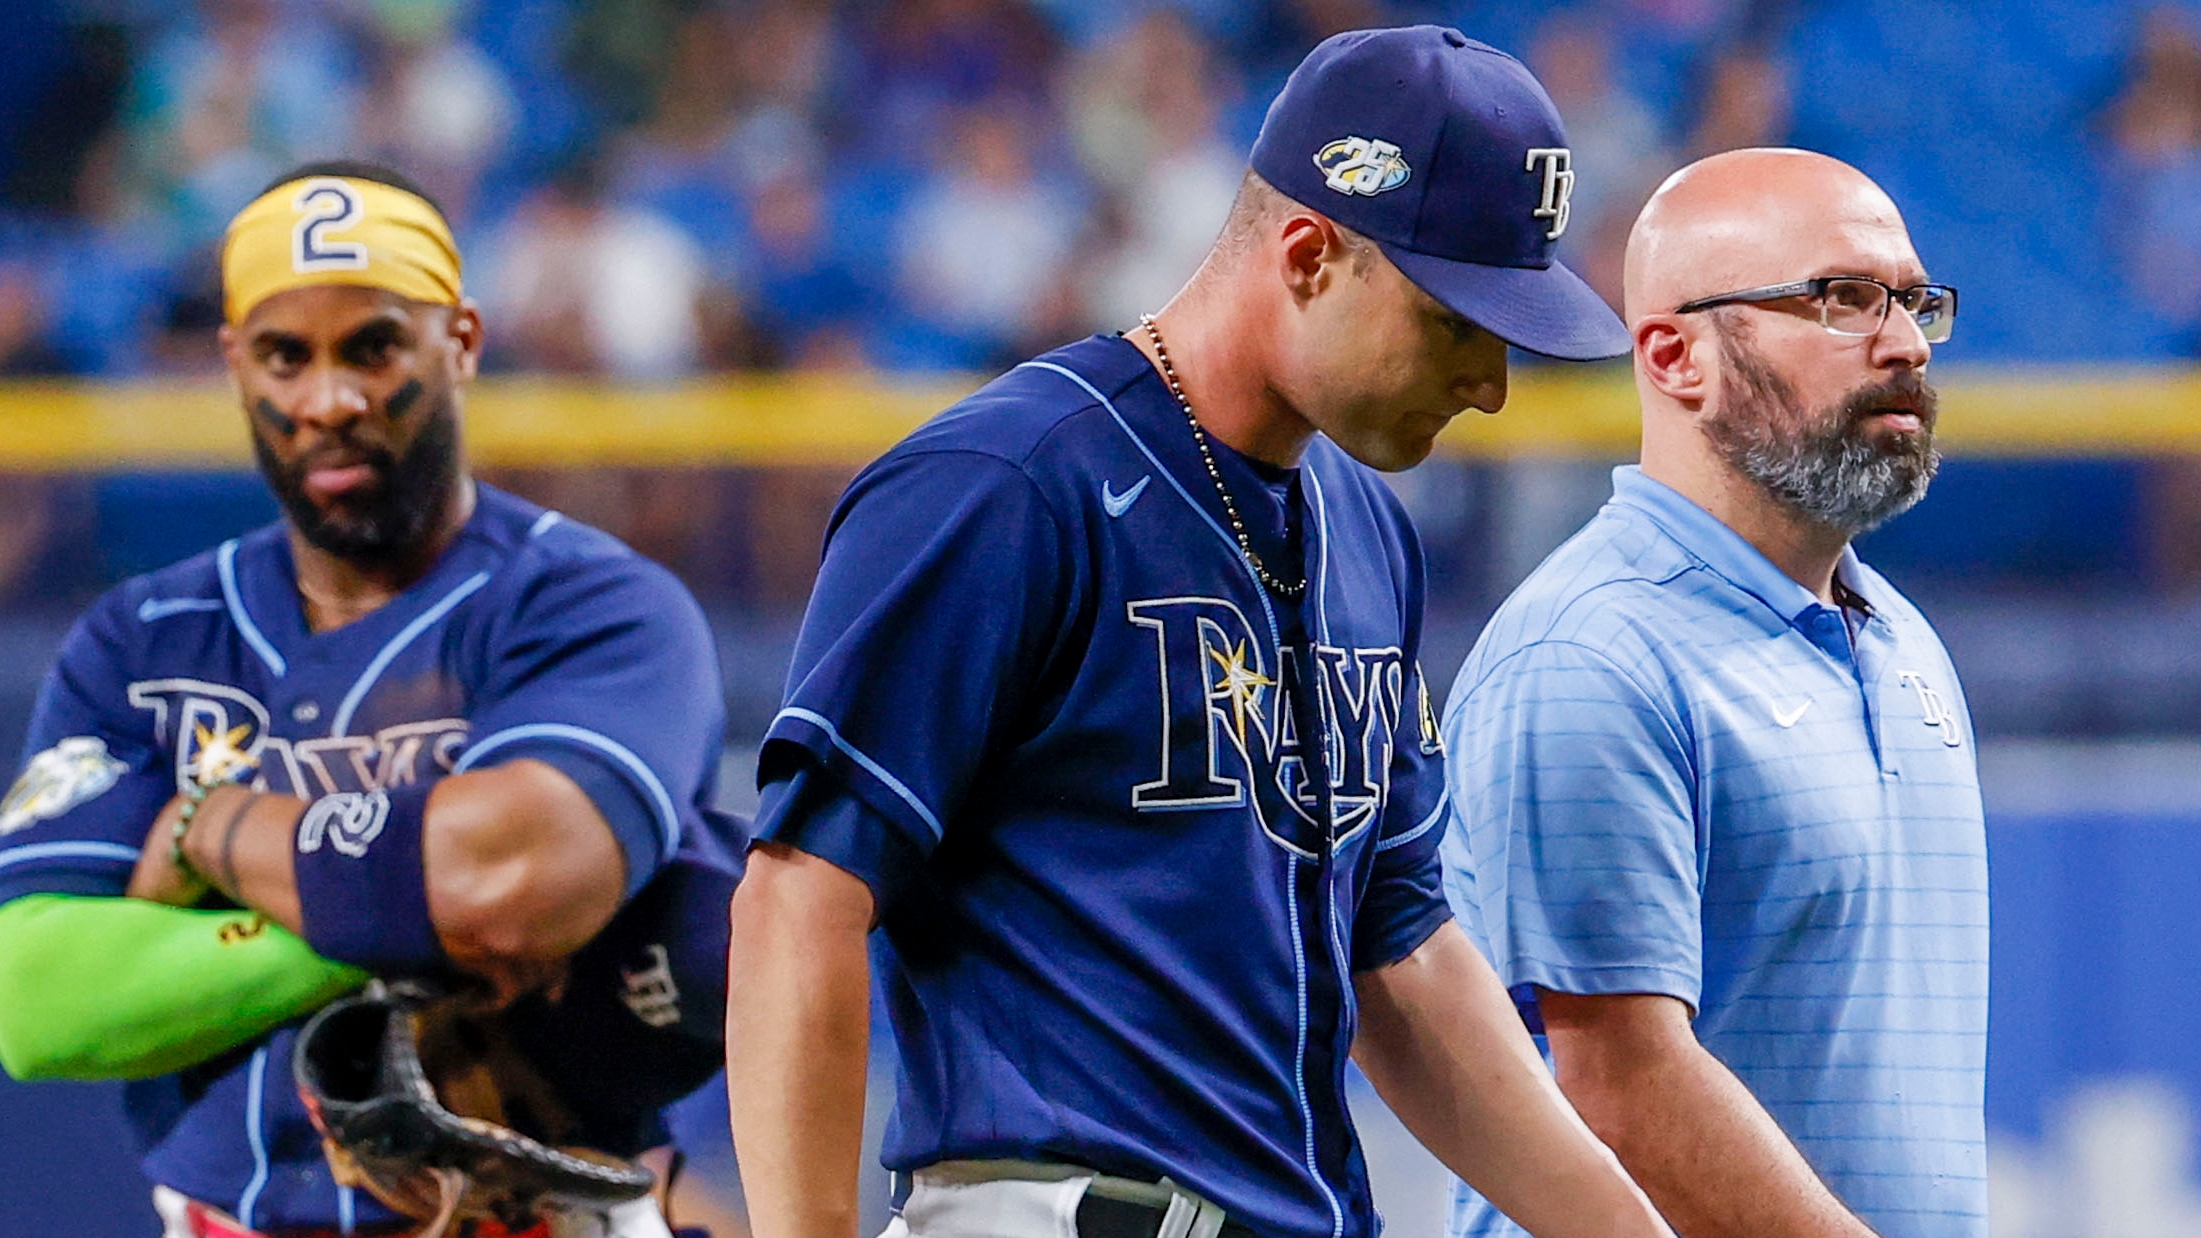 Rays officially name Shane McClanahan the Opening Day Starter